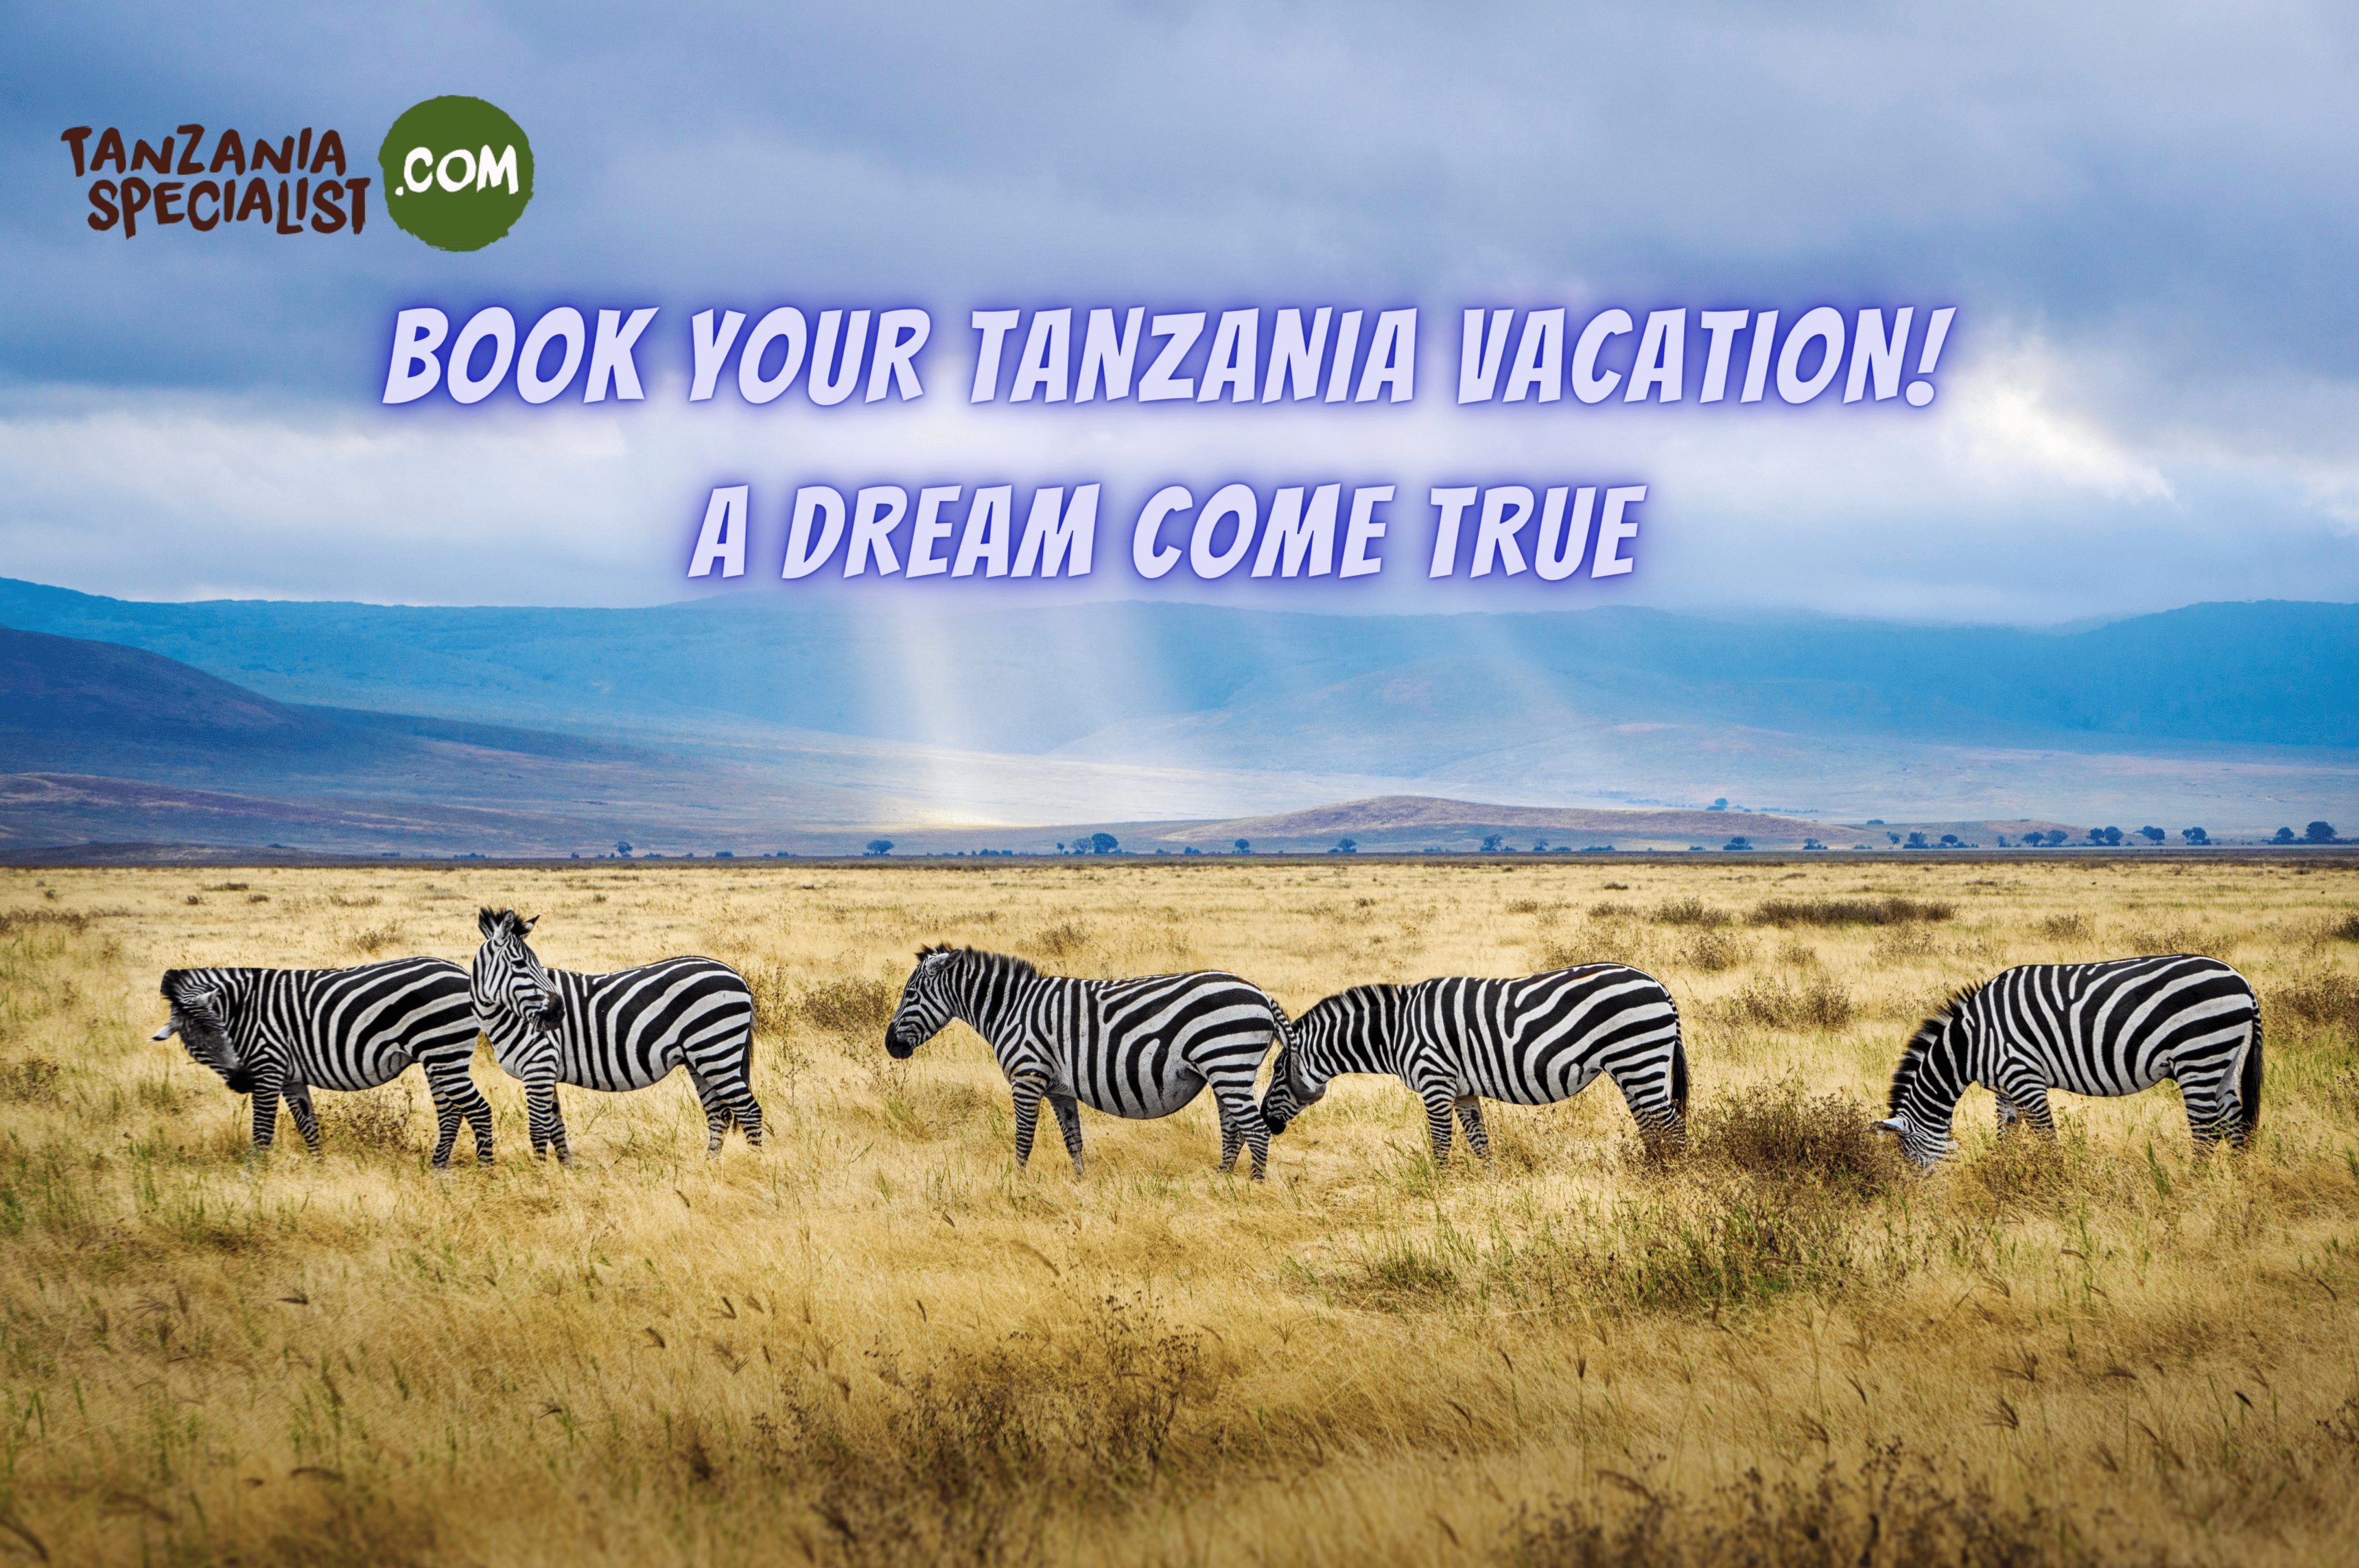 Adventures and Exotic Wildlife Encounters with Tanzania Specialist: A Company Review